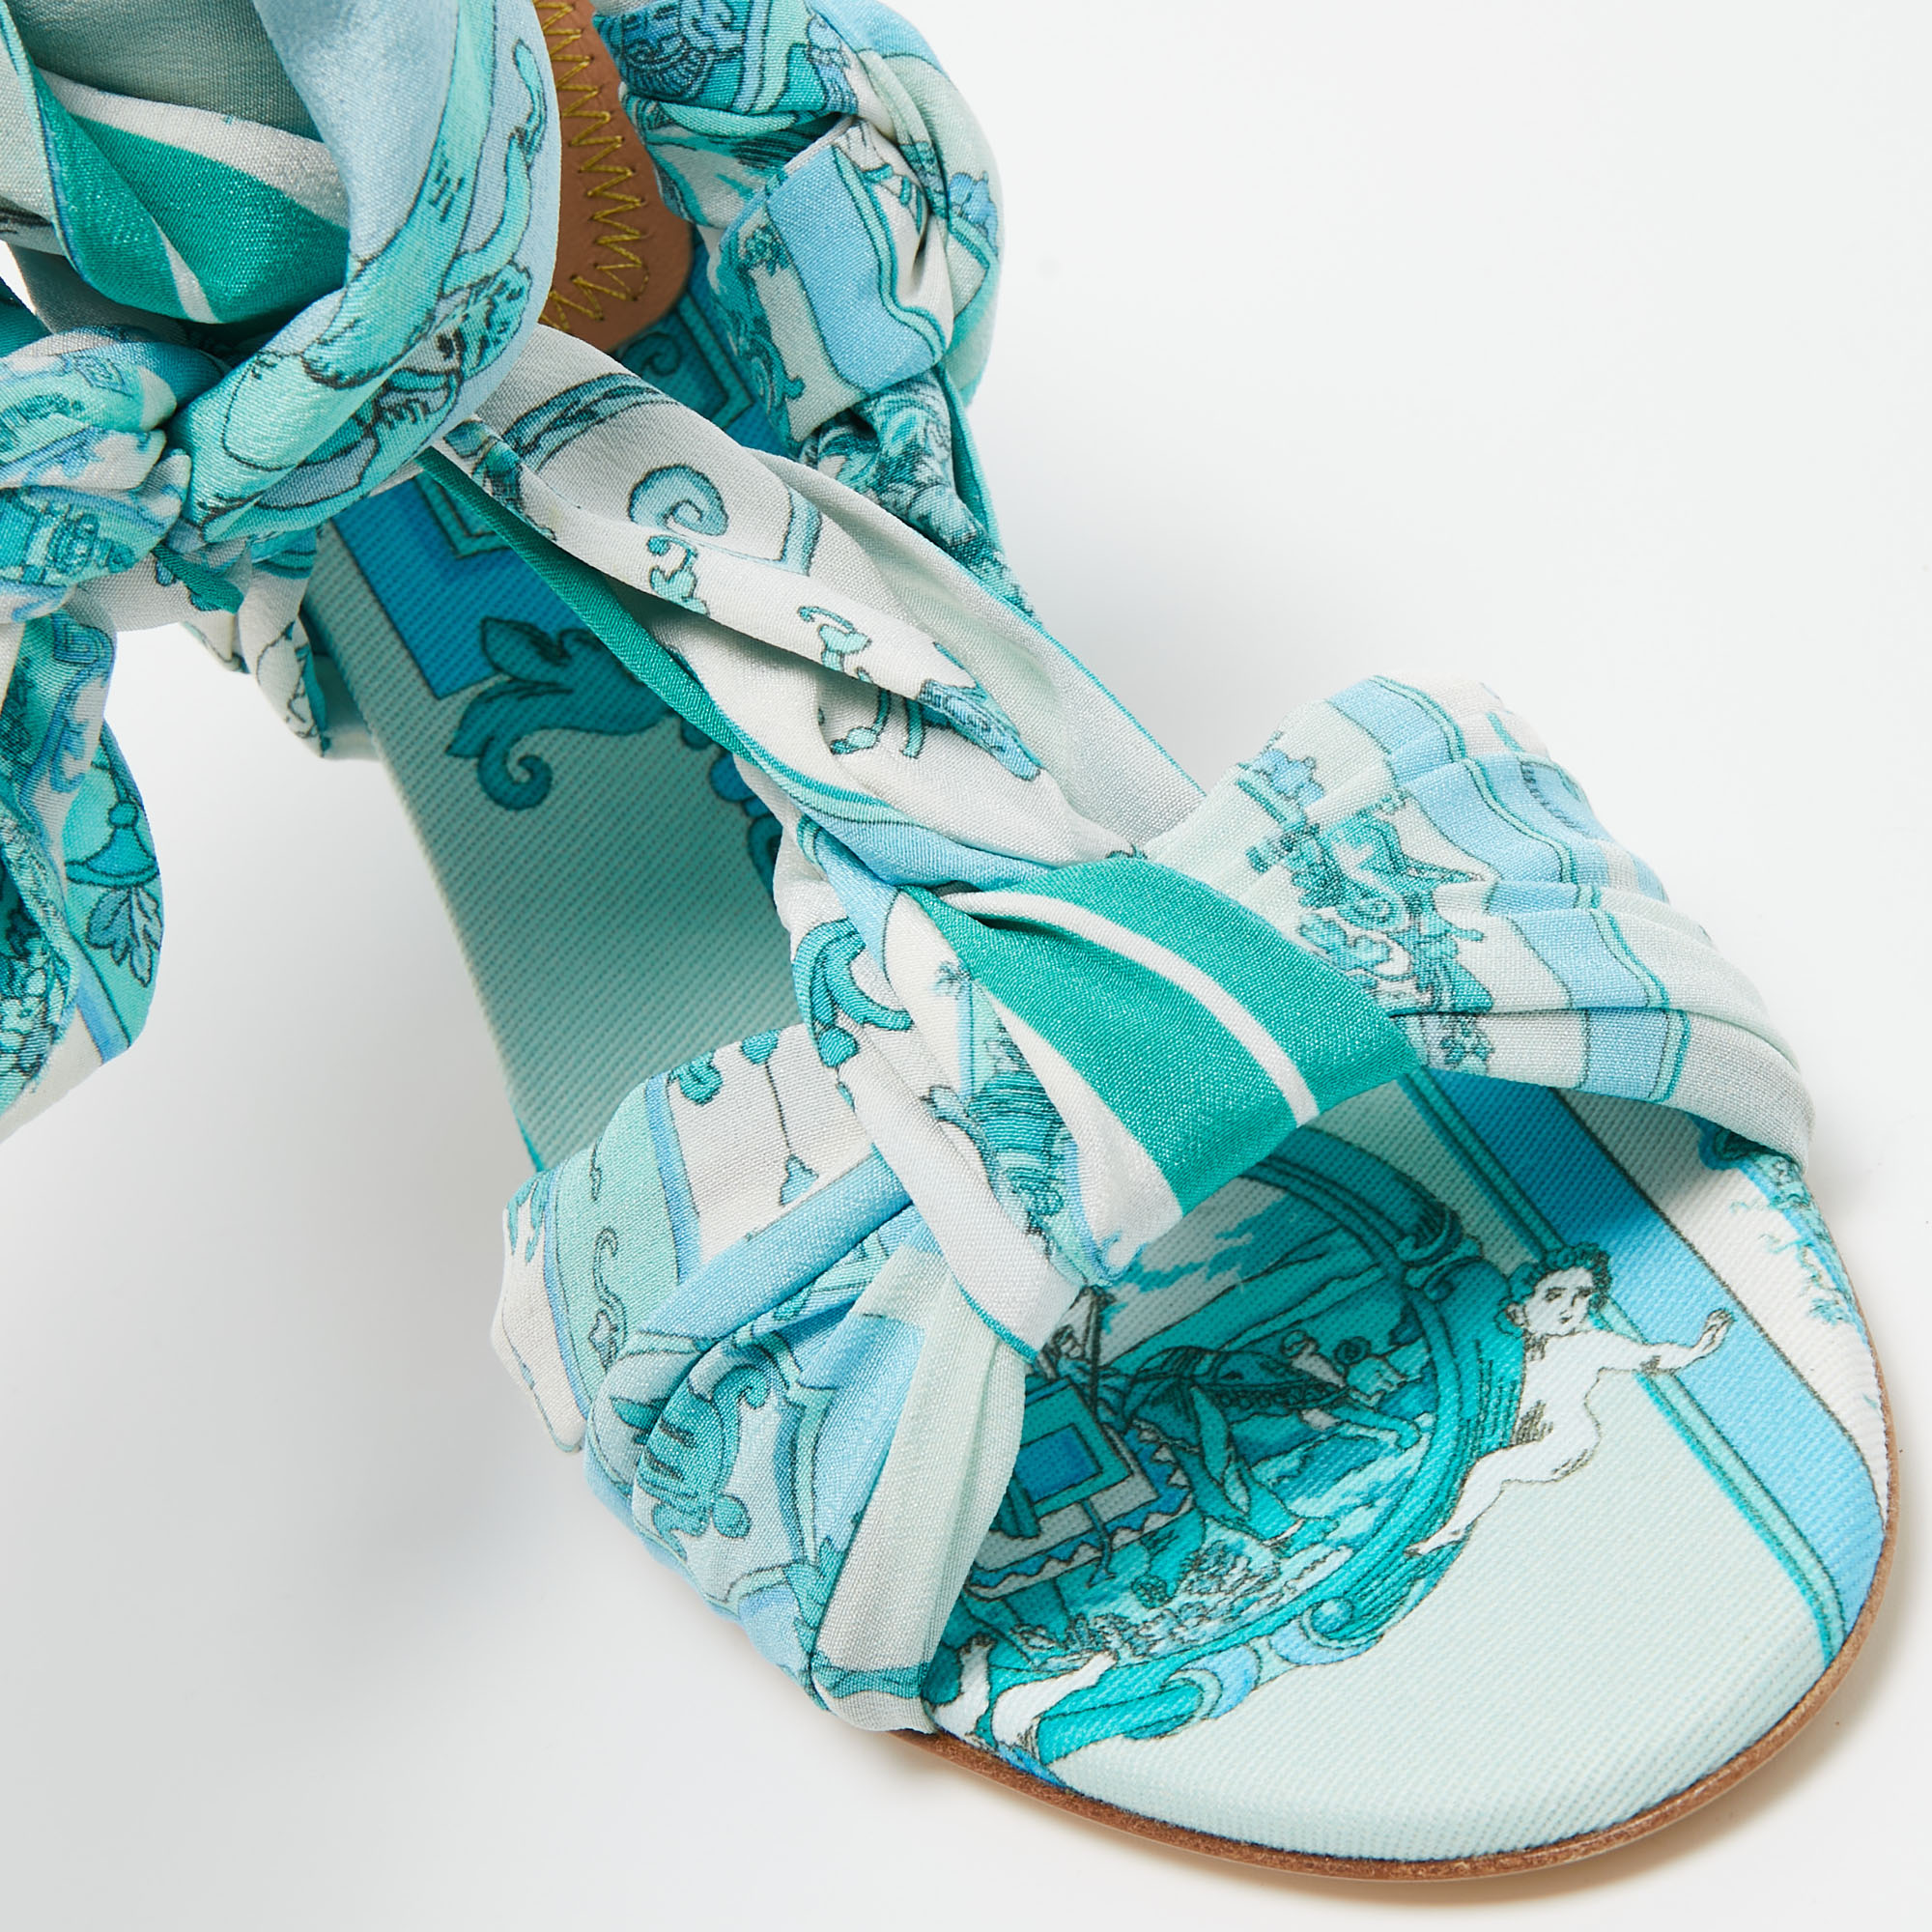 Etro Blue Ornamental Scarf Printed Fabric Block Heel Ankle Wrap Sandals Size 38